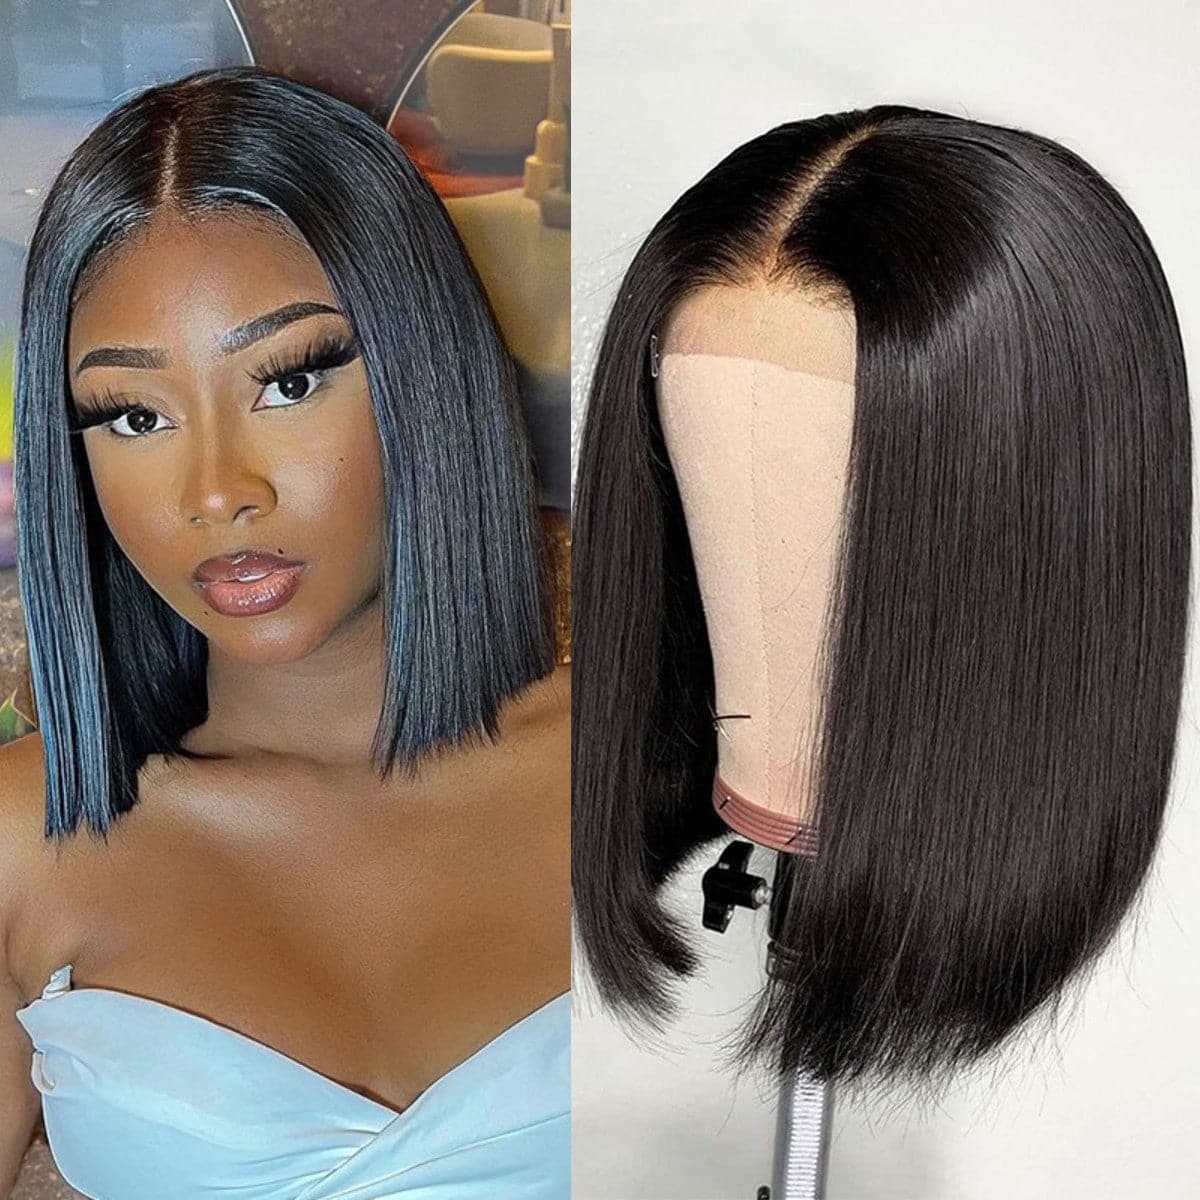 Urgirl Asymmetrical Bob Wigs Blunt Haircuts Lace Front Wigs with Side Part Perfect For Any Face Shapes